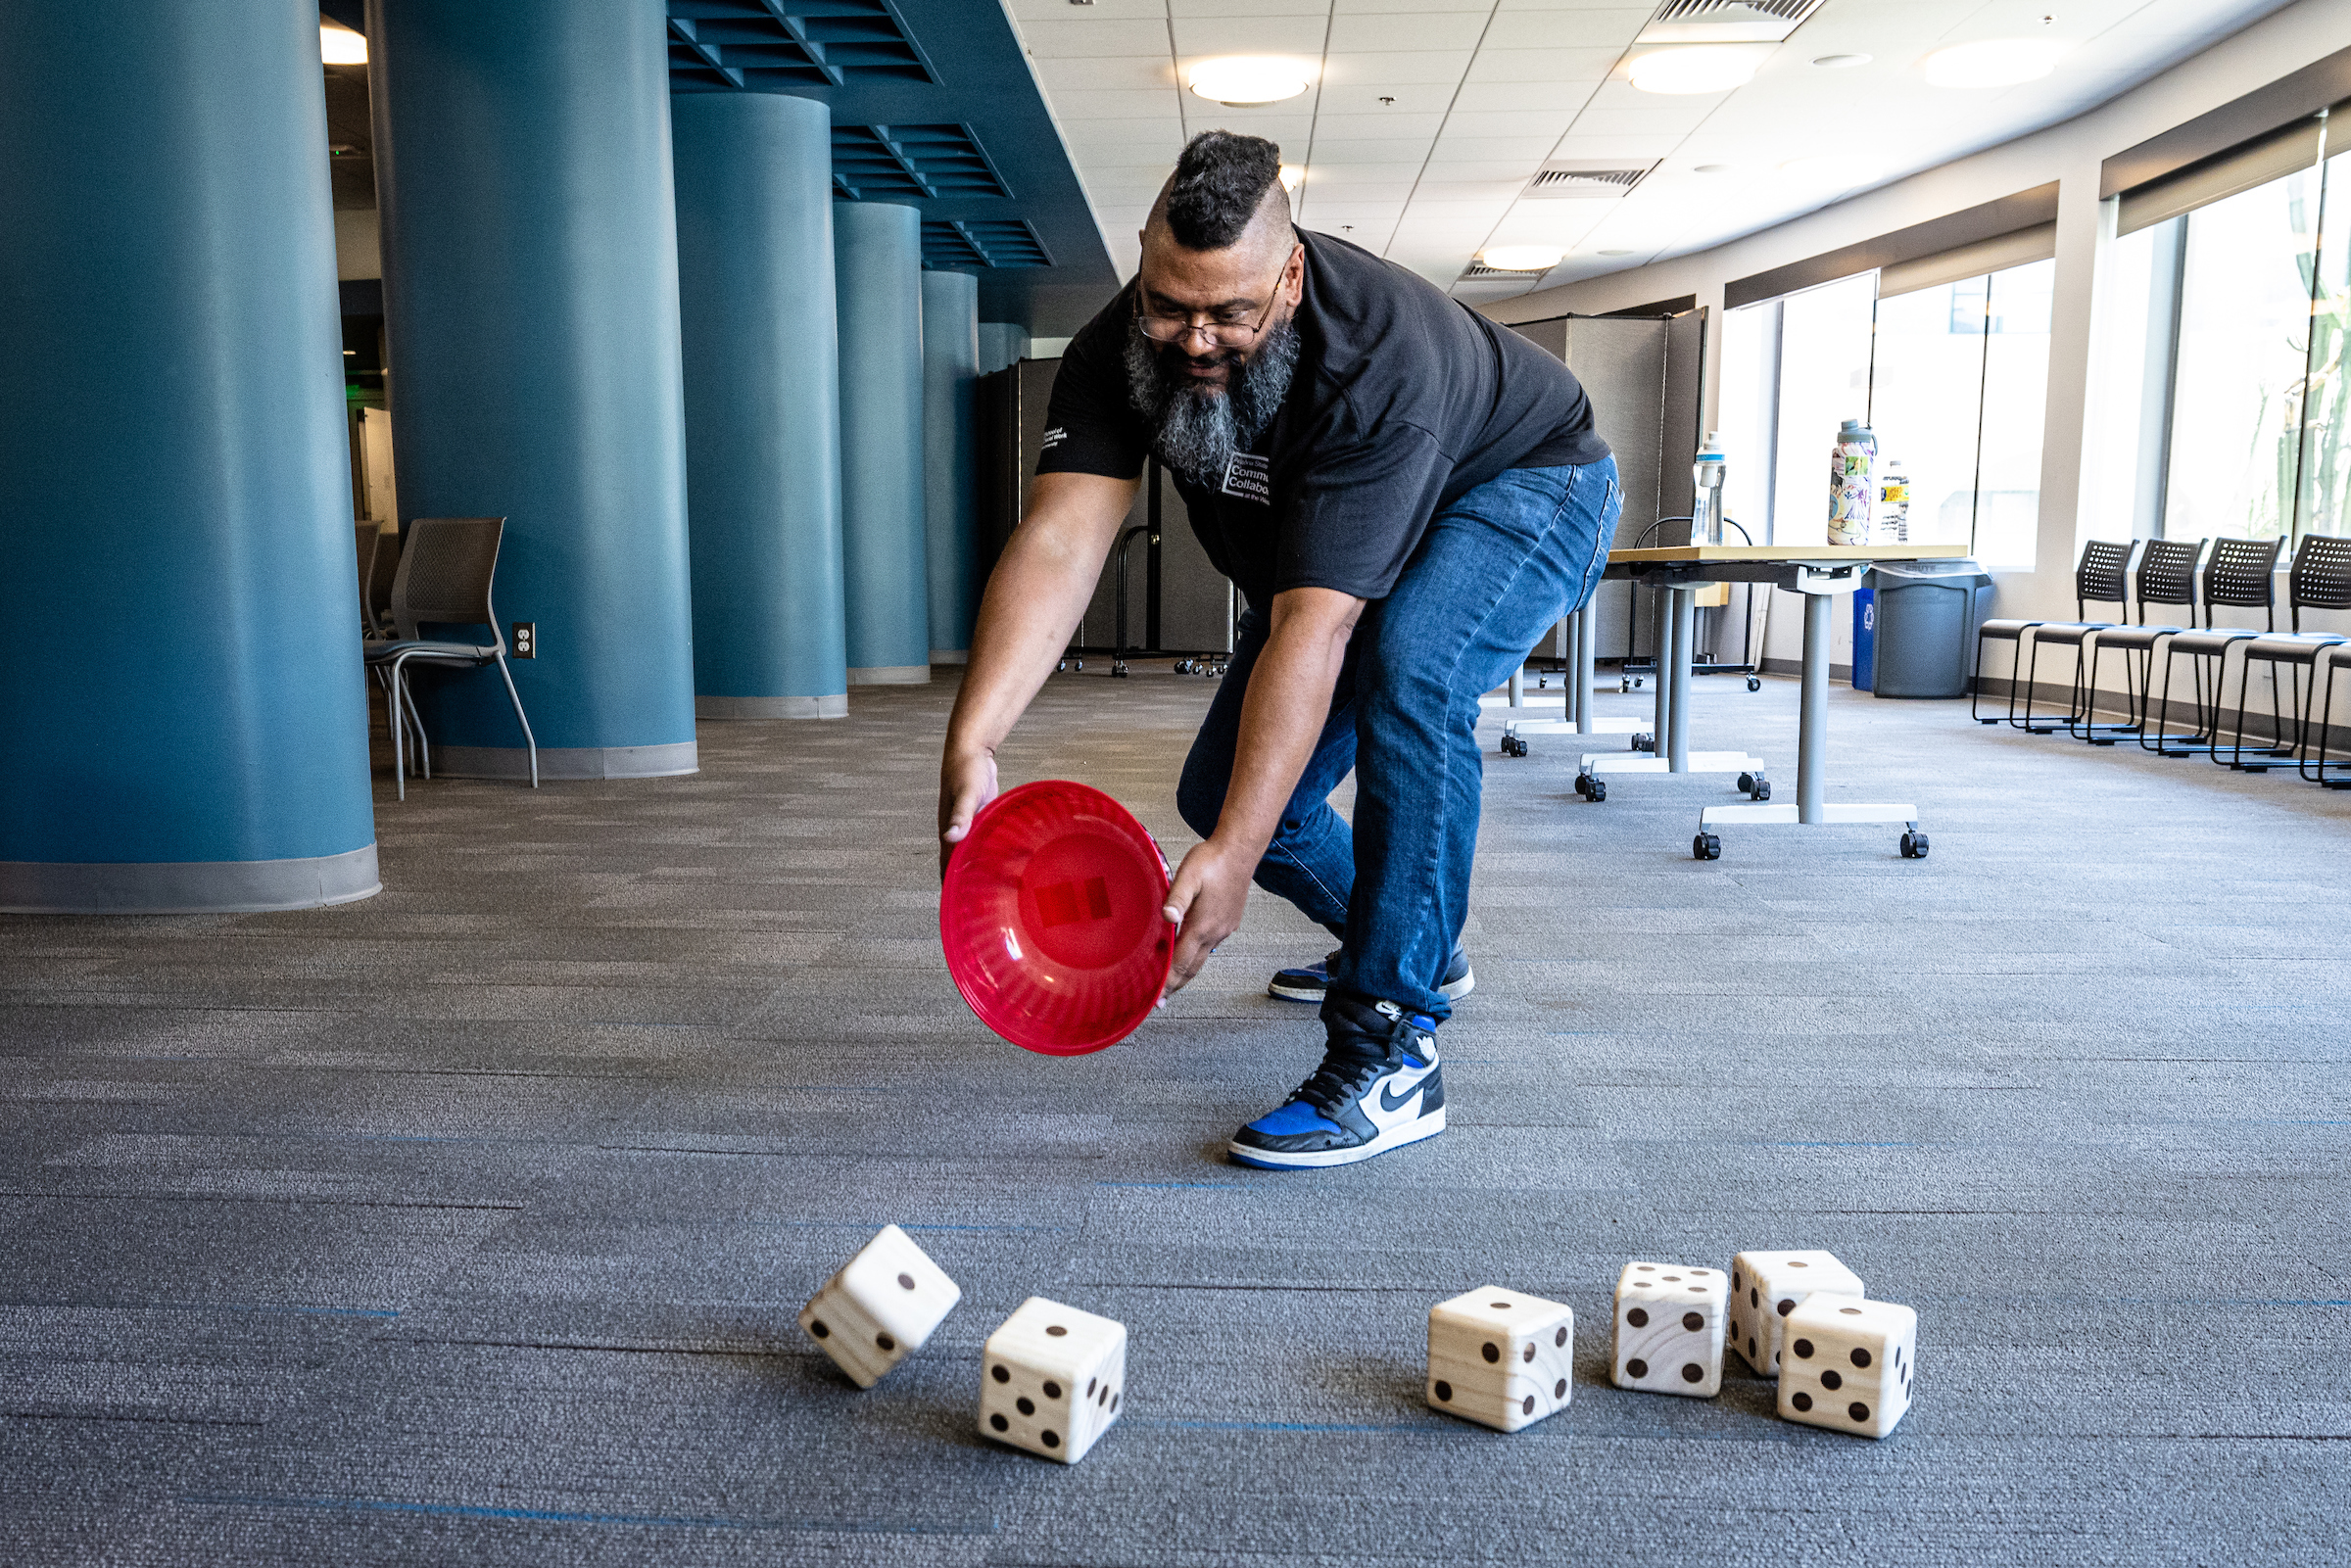 Student throws a bucket of giant dice onto the floor